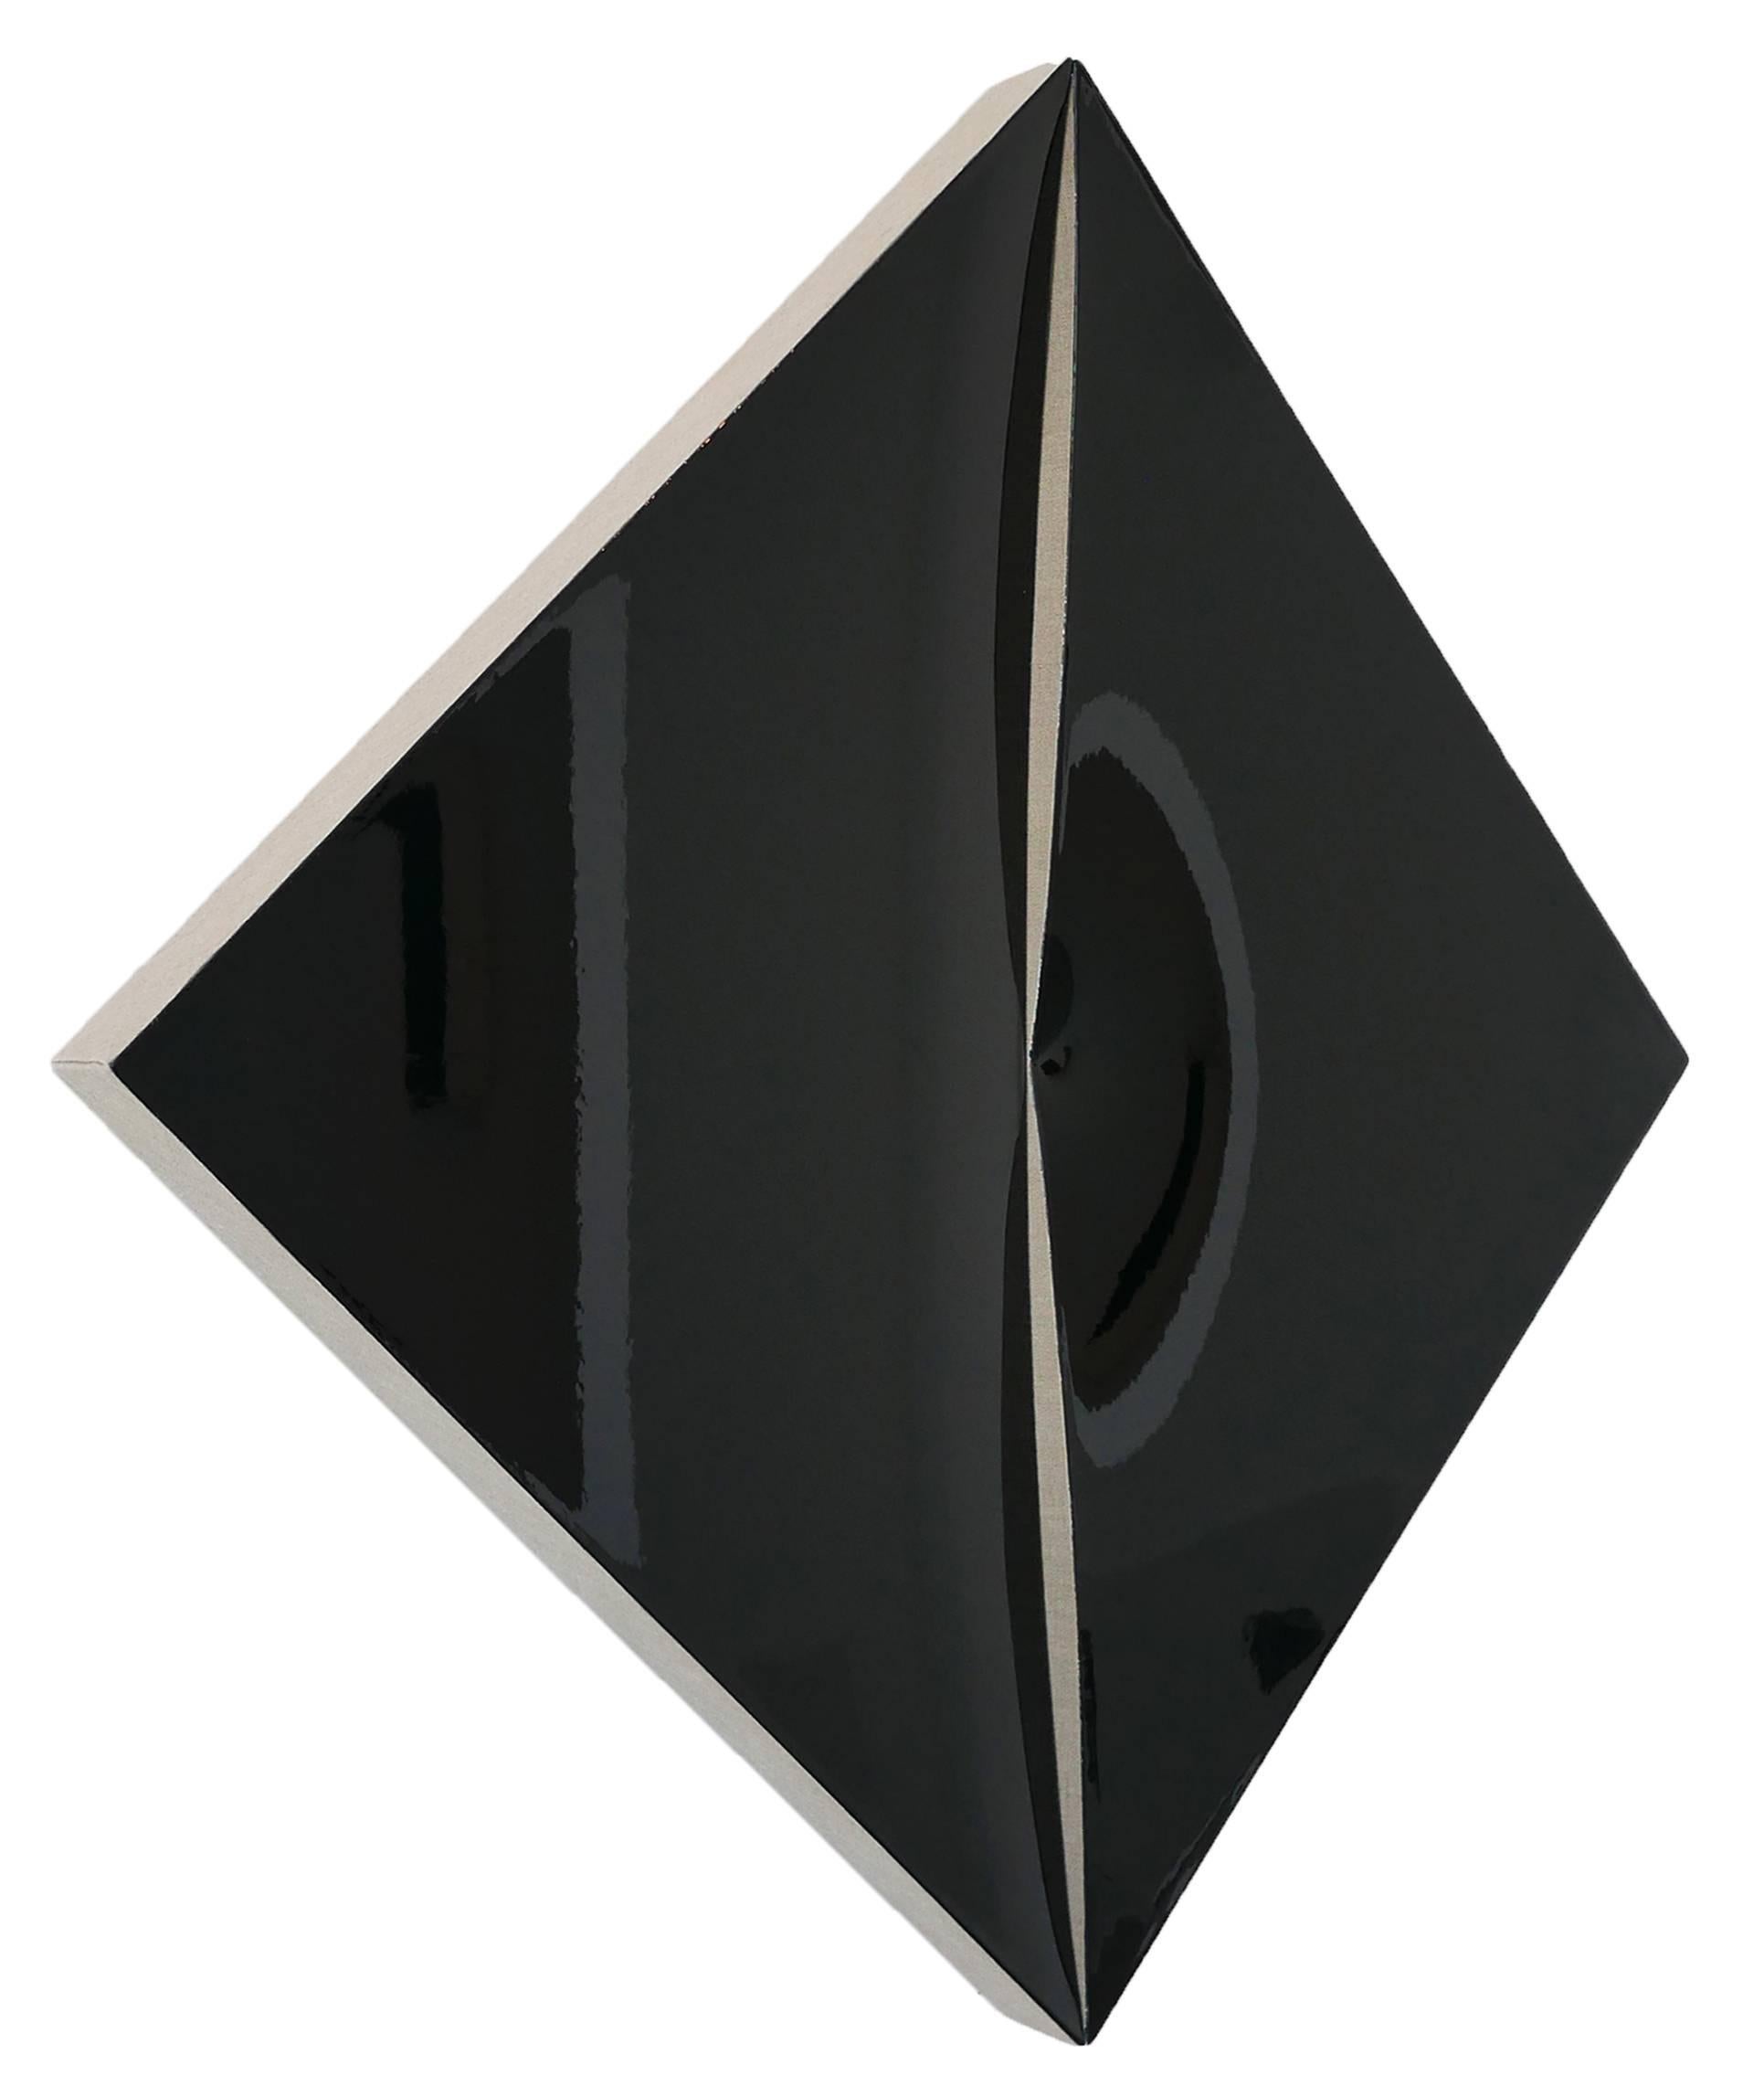 Non-Fit Triangles II - Painting by Jan Maarten Voskuil